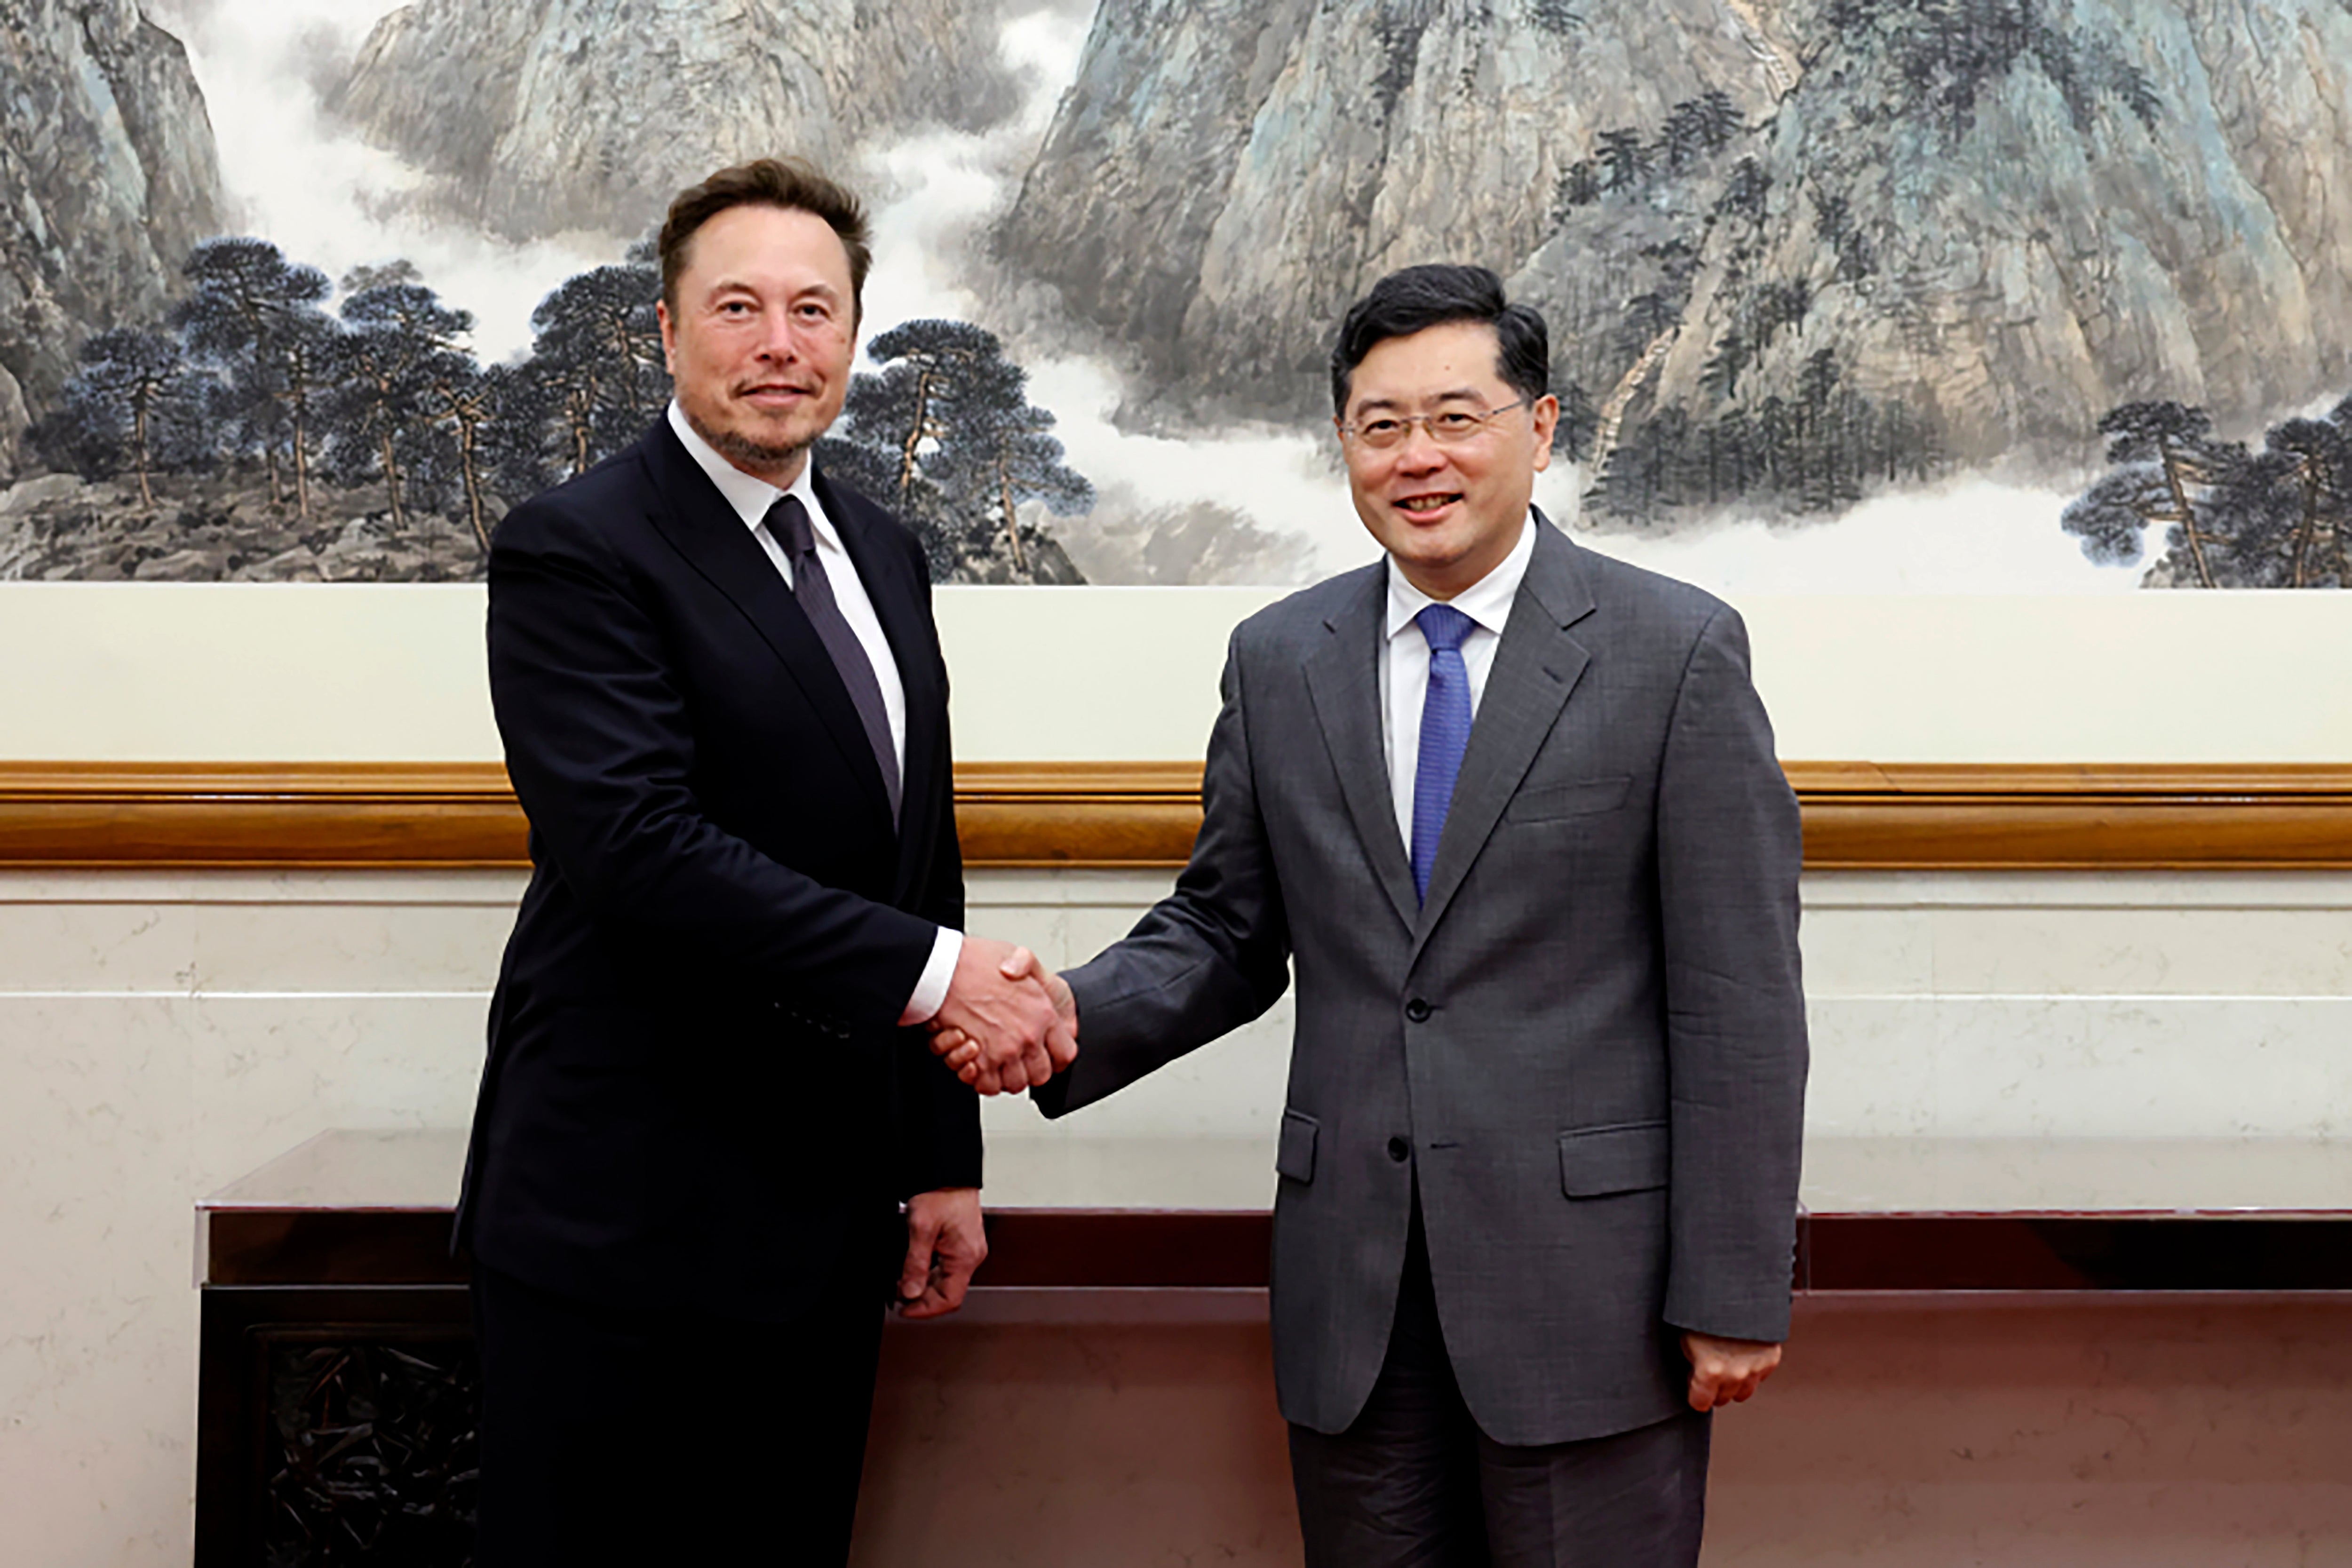 Musk has valuable interests in China that require nurturing and protecting